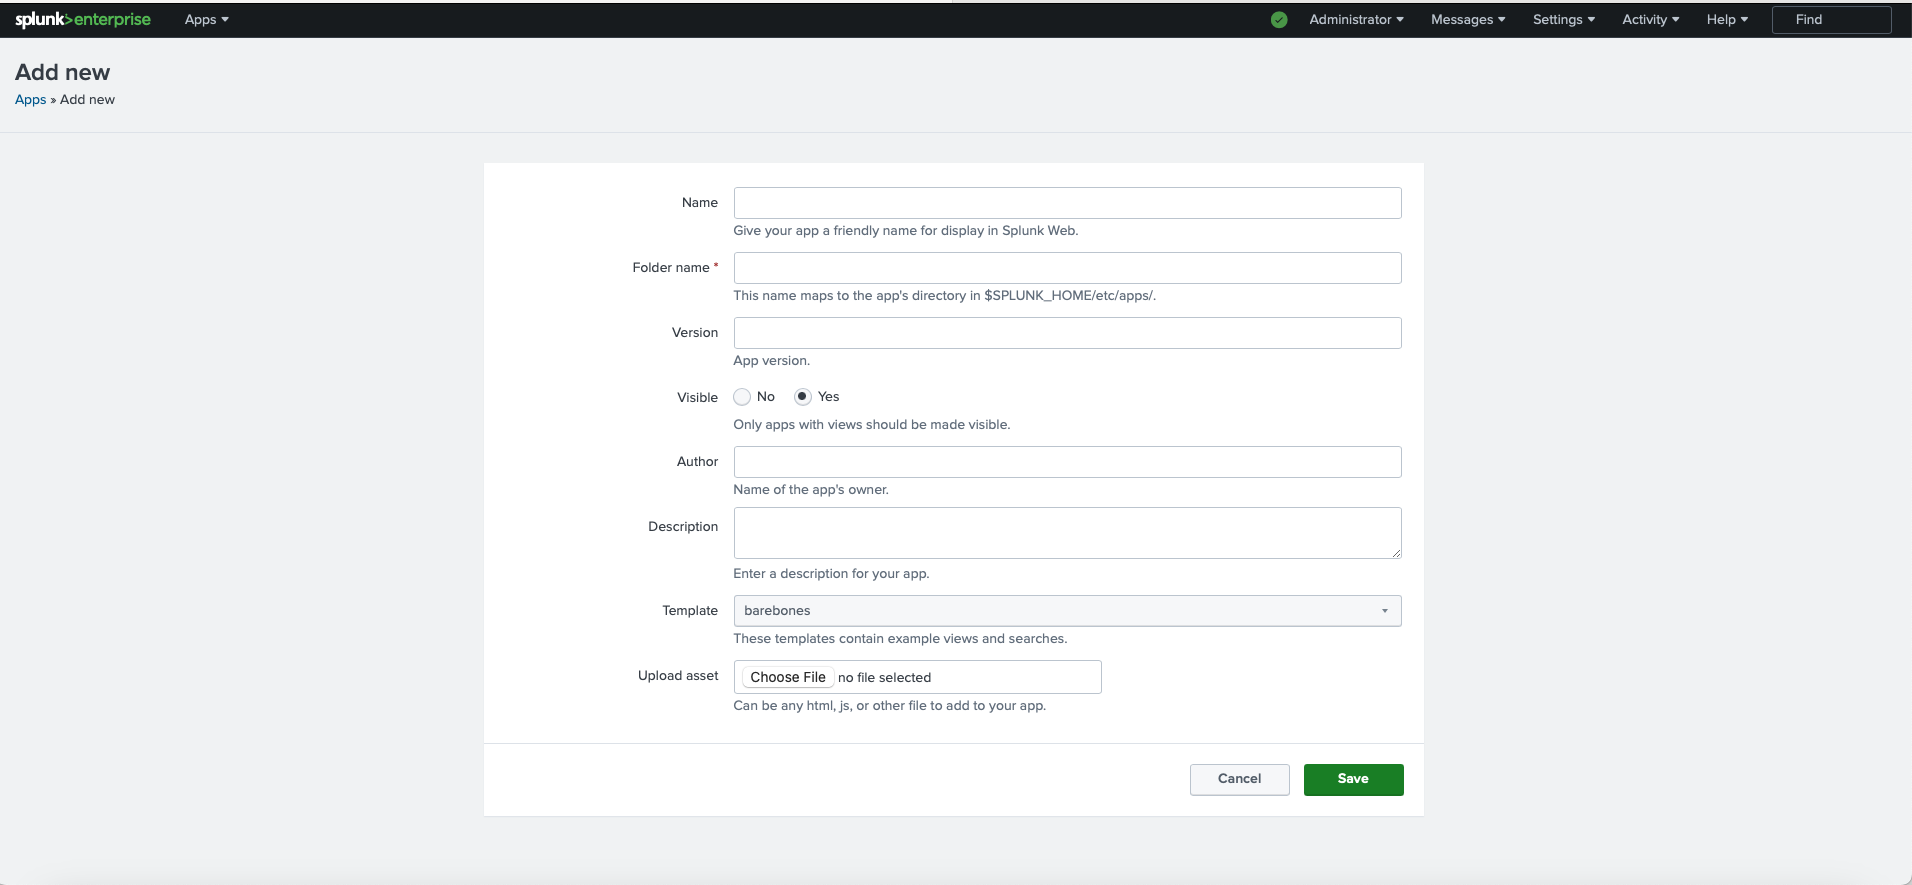 Interface for creating a new app in Splunk, showing fields for name, folder, version, and more.